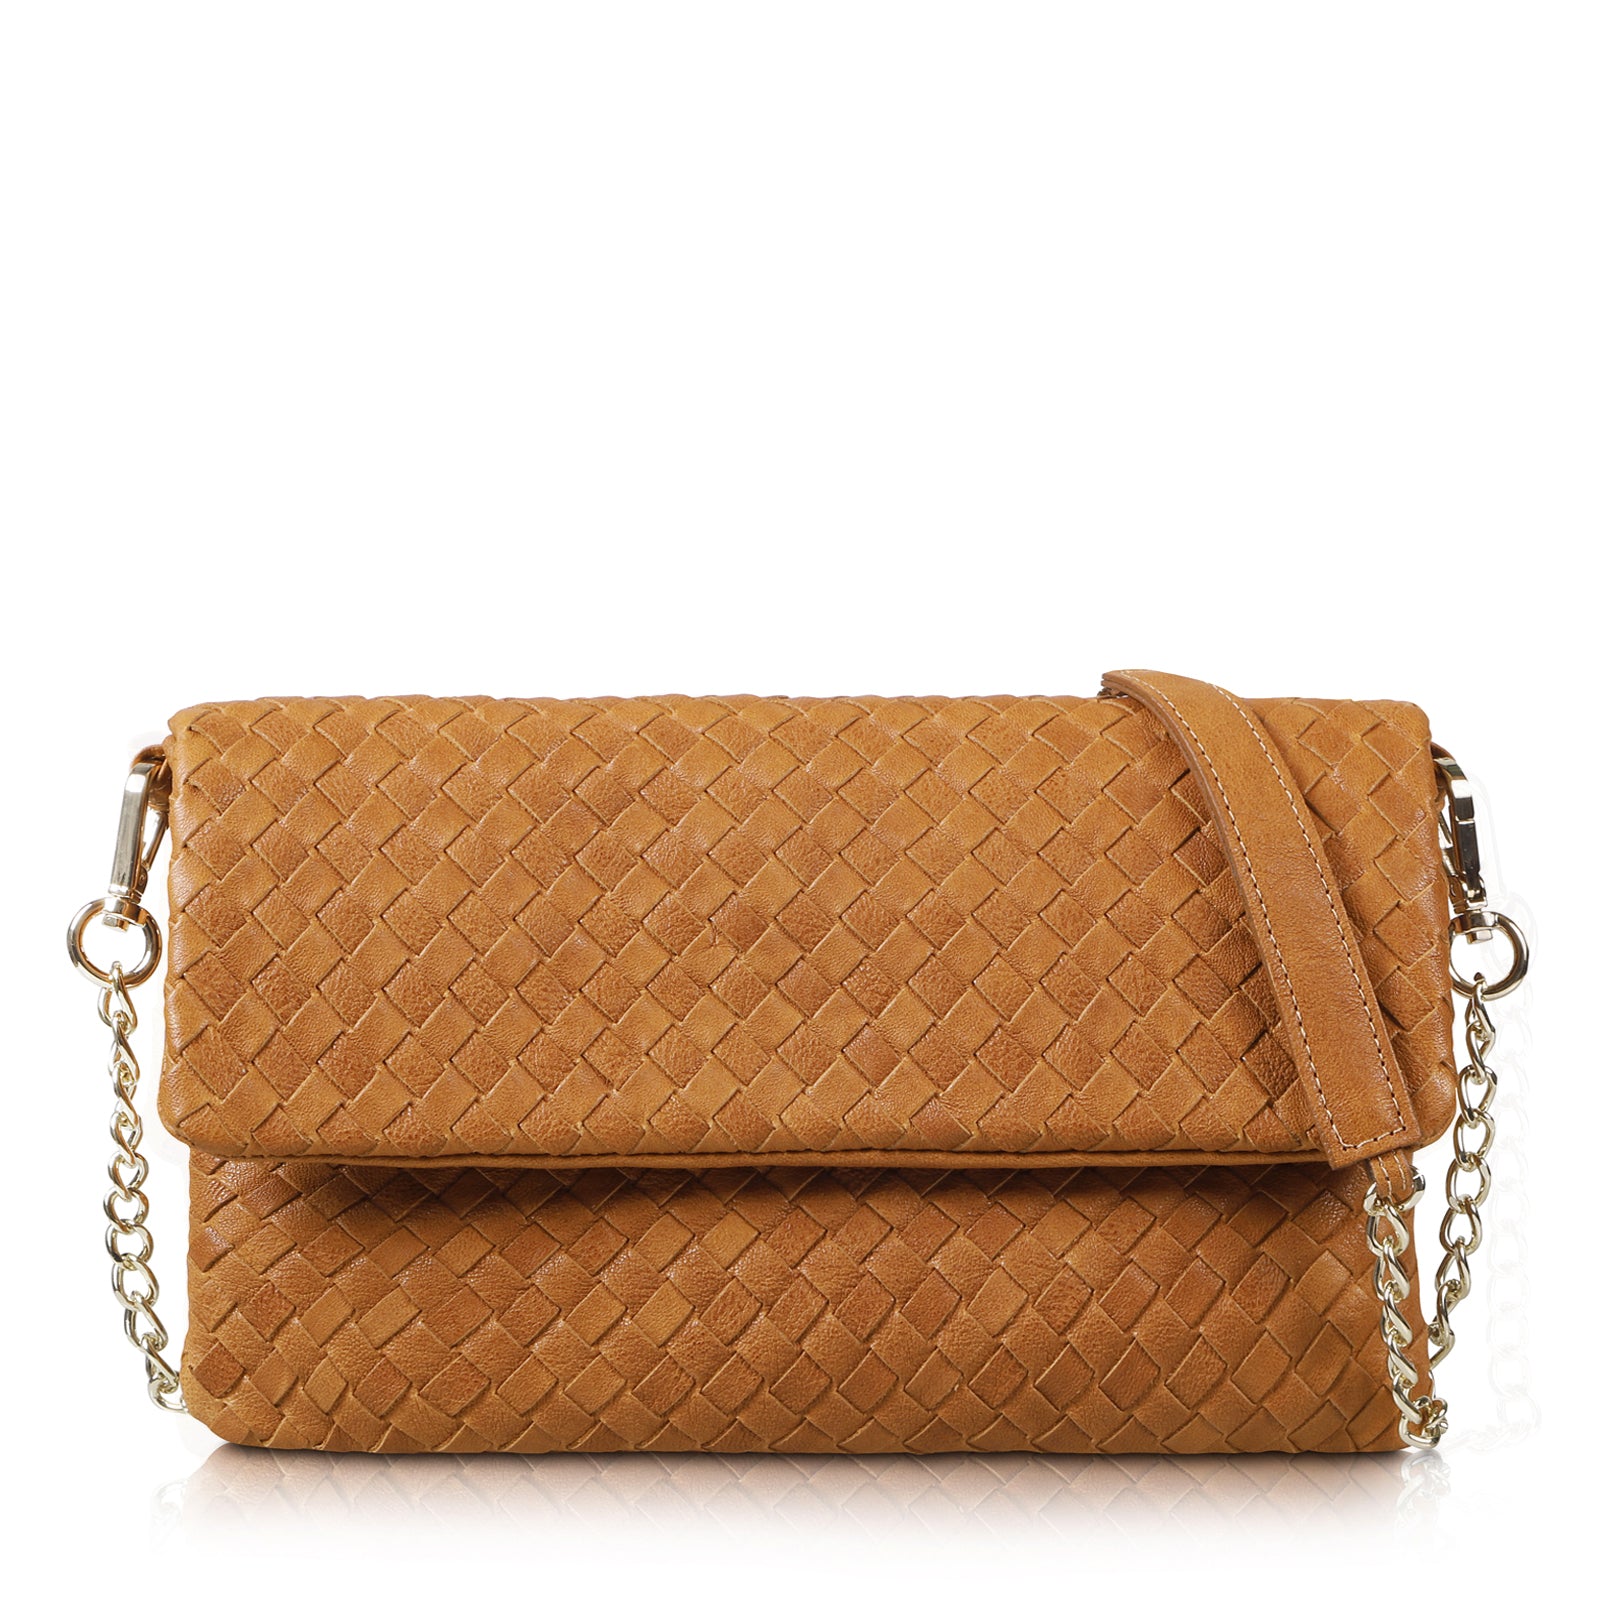 Woven Leather Crossbody or Clutch Bag - Conders